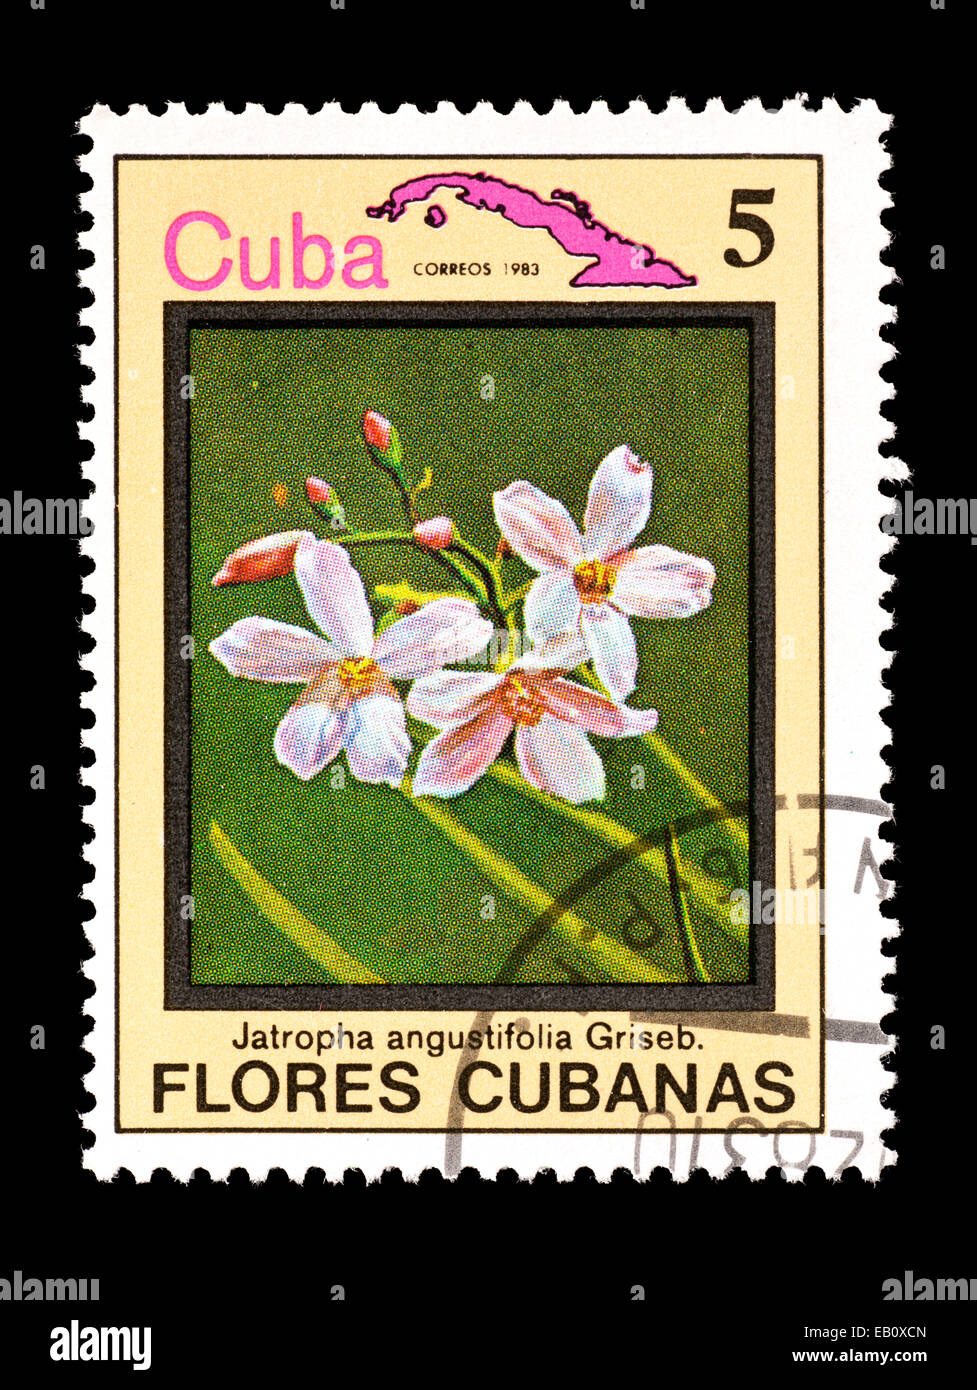 Postage stamp from Cuba depicting the flowers of a tropical spurge (Jatropha angustifolia) Stock Photo